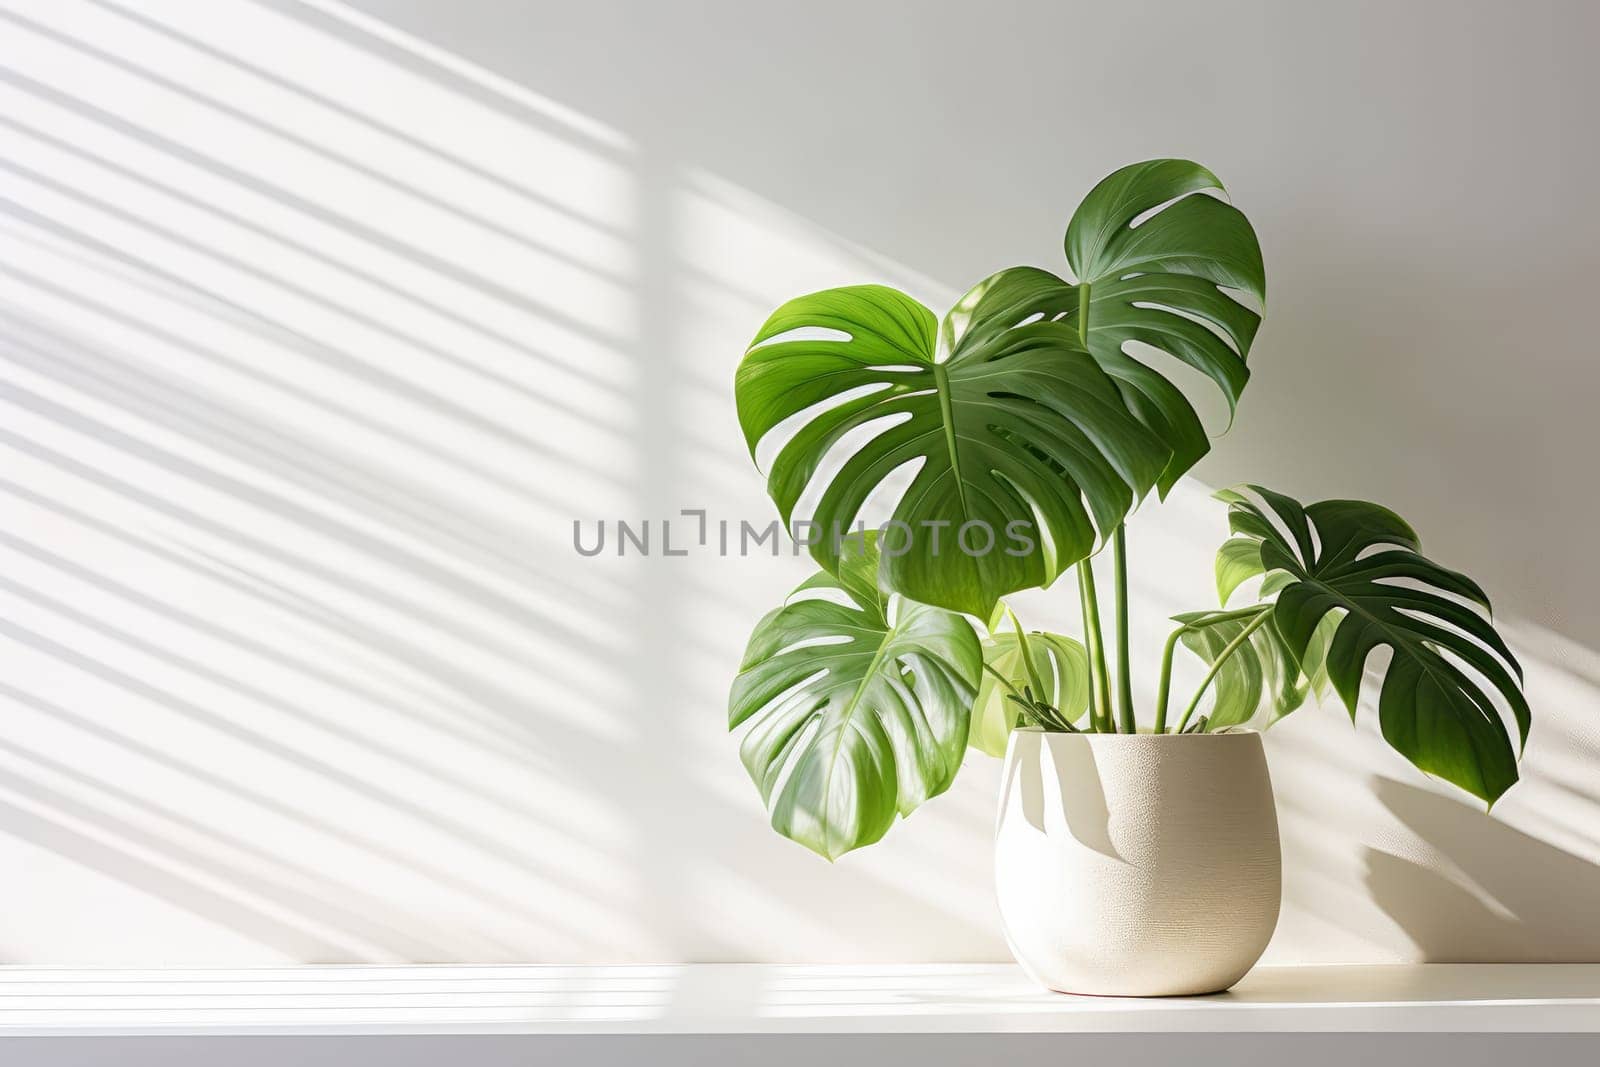 Home plants in white pots. Lighting - sunlight. Background white wall. Copy space for text.